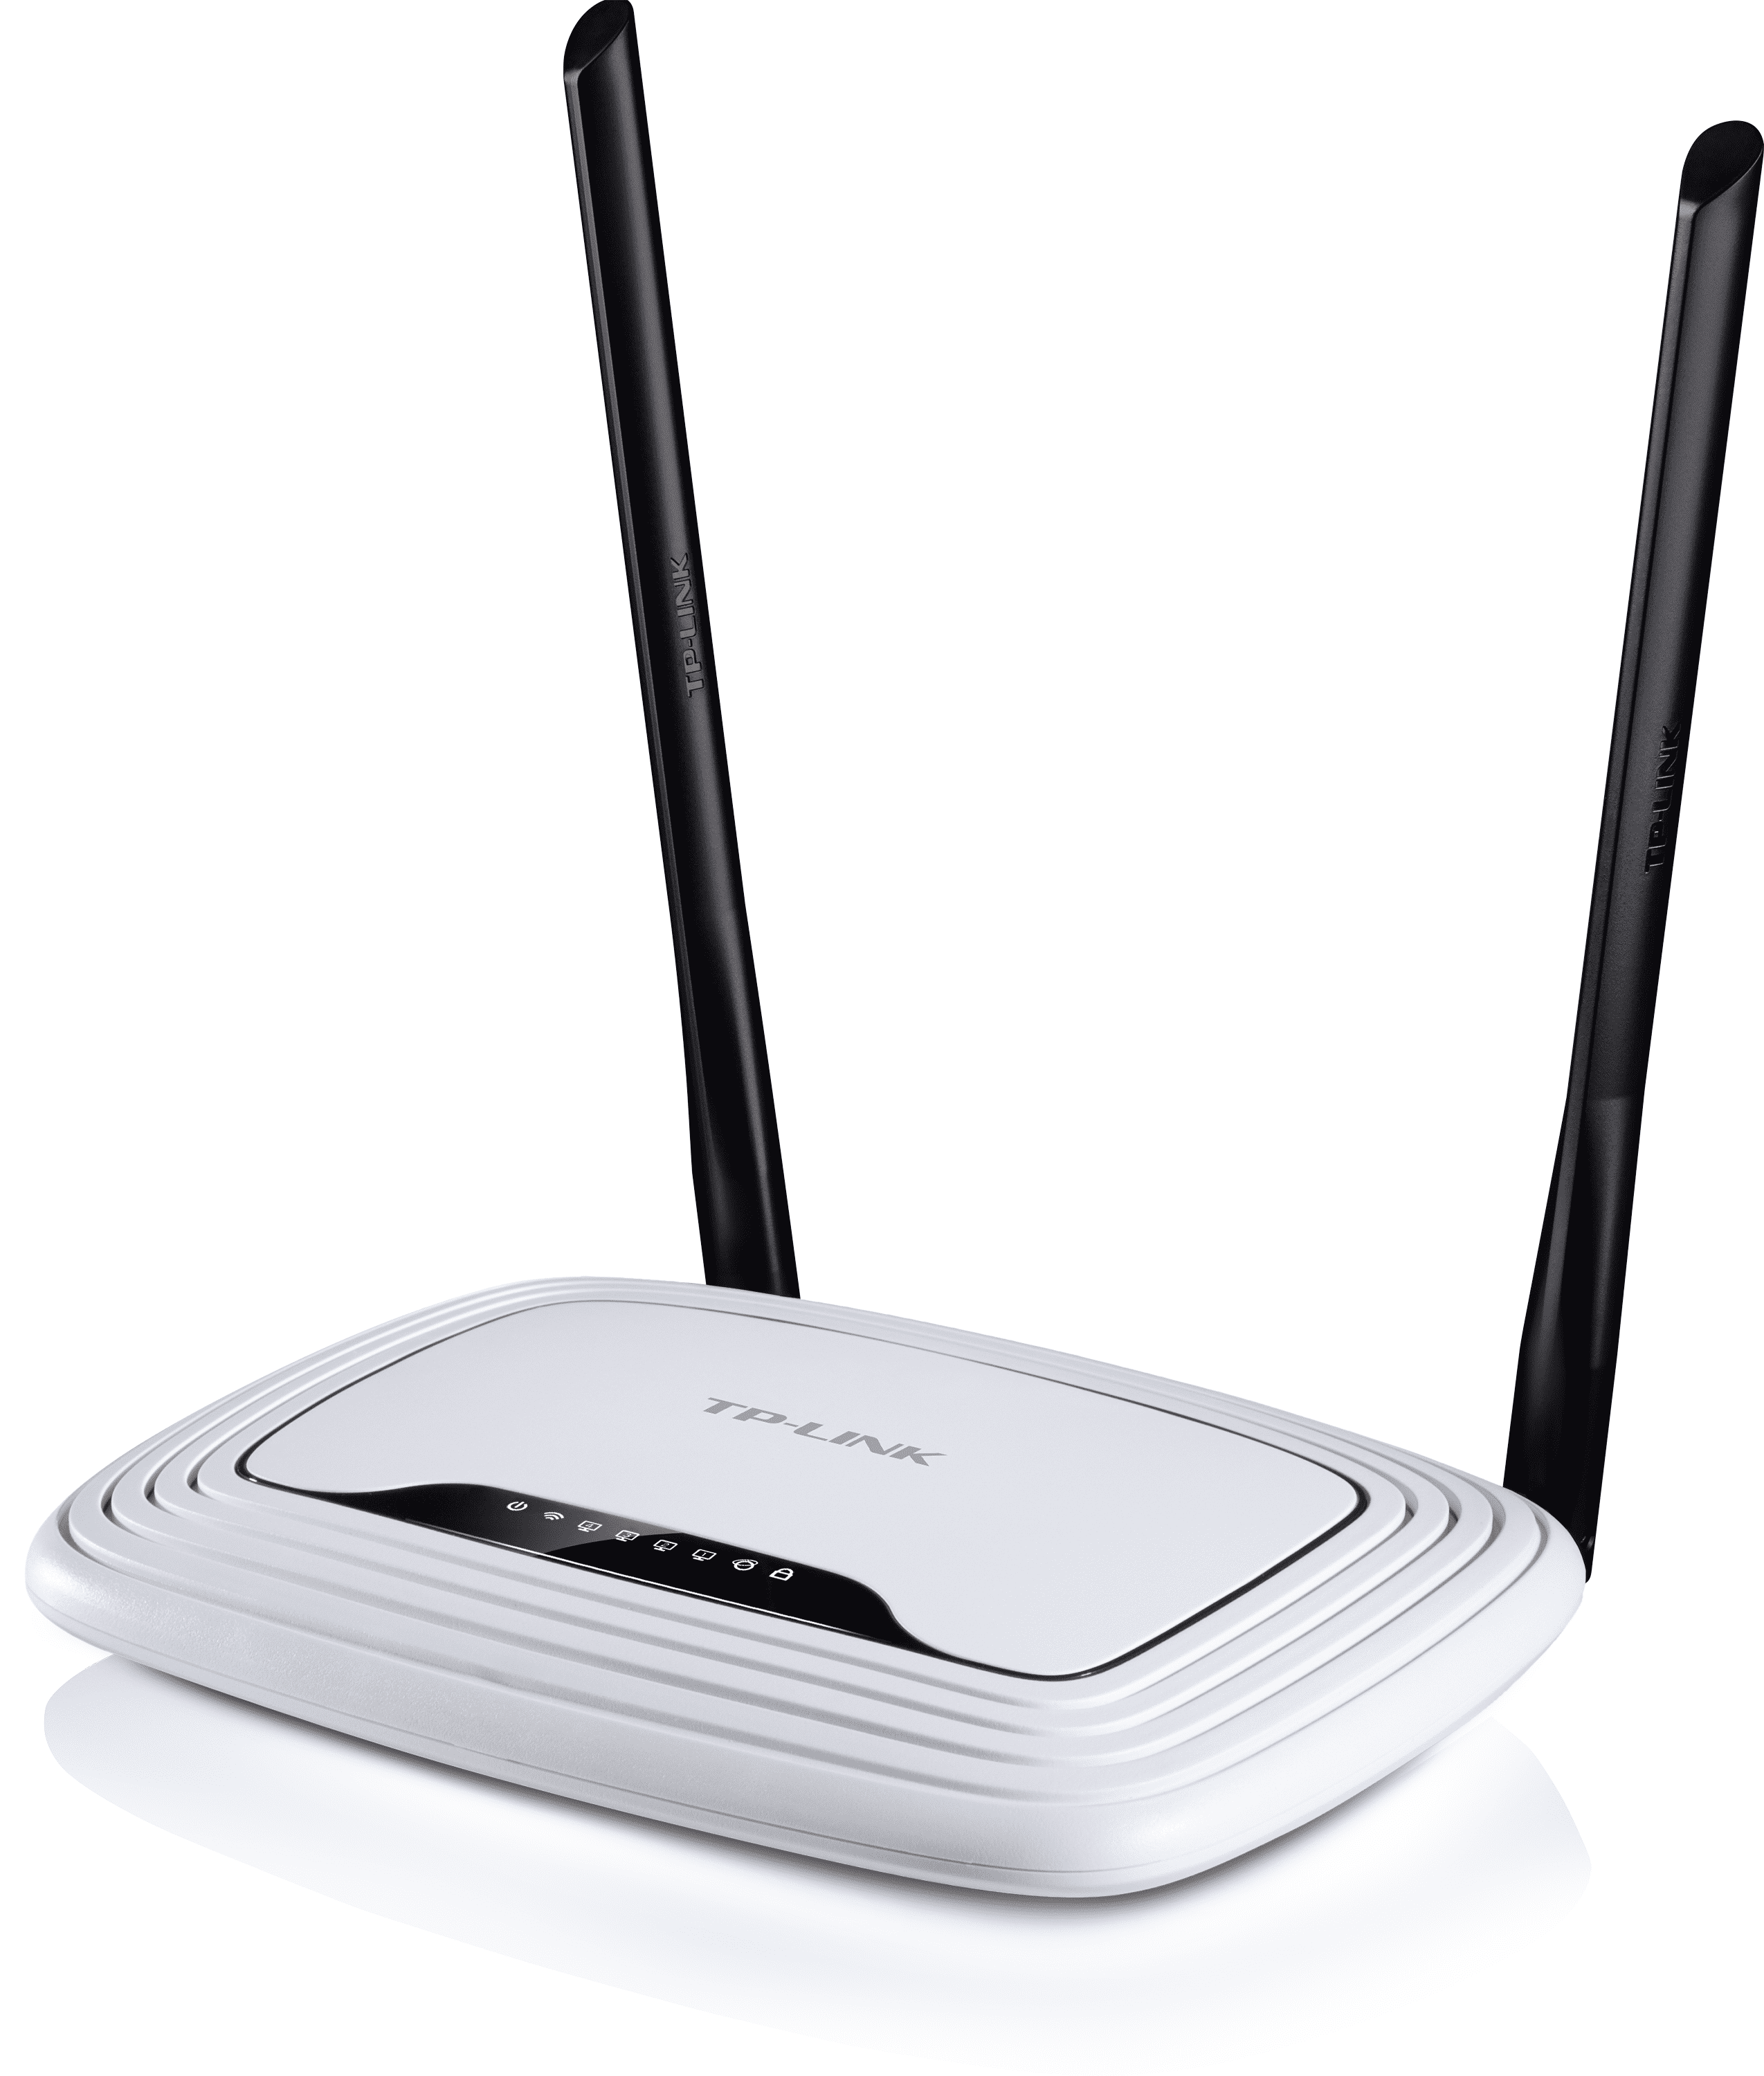 Hollow Contract kill TP-Link TL-WR841N, 300Mbps Wireless N Router - Walmart.com